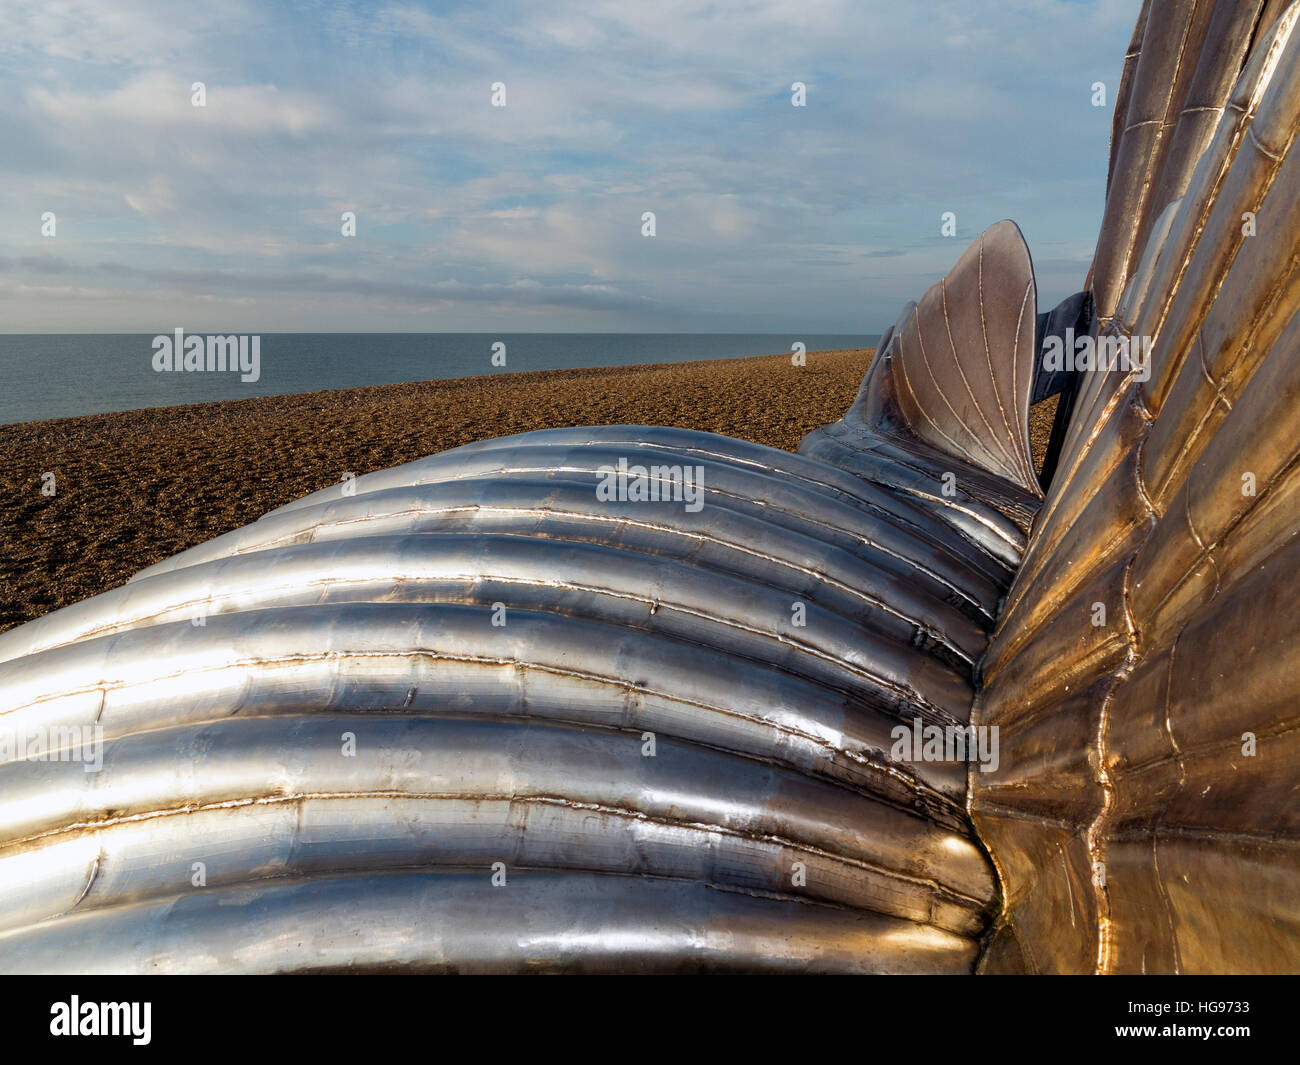 A detail of 'The Scallop' stainless steel sculpture by Maggi Hambling on the shingle beach at Aldeburgh Suffolk England Stock Photo